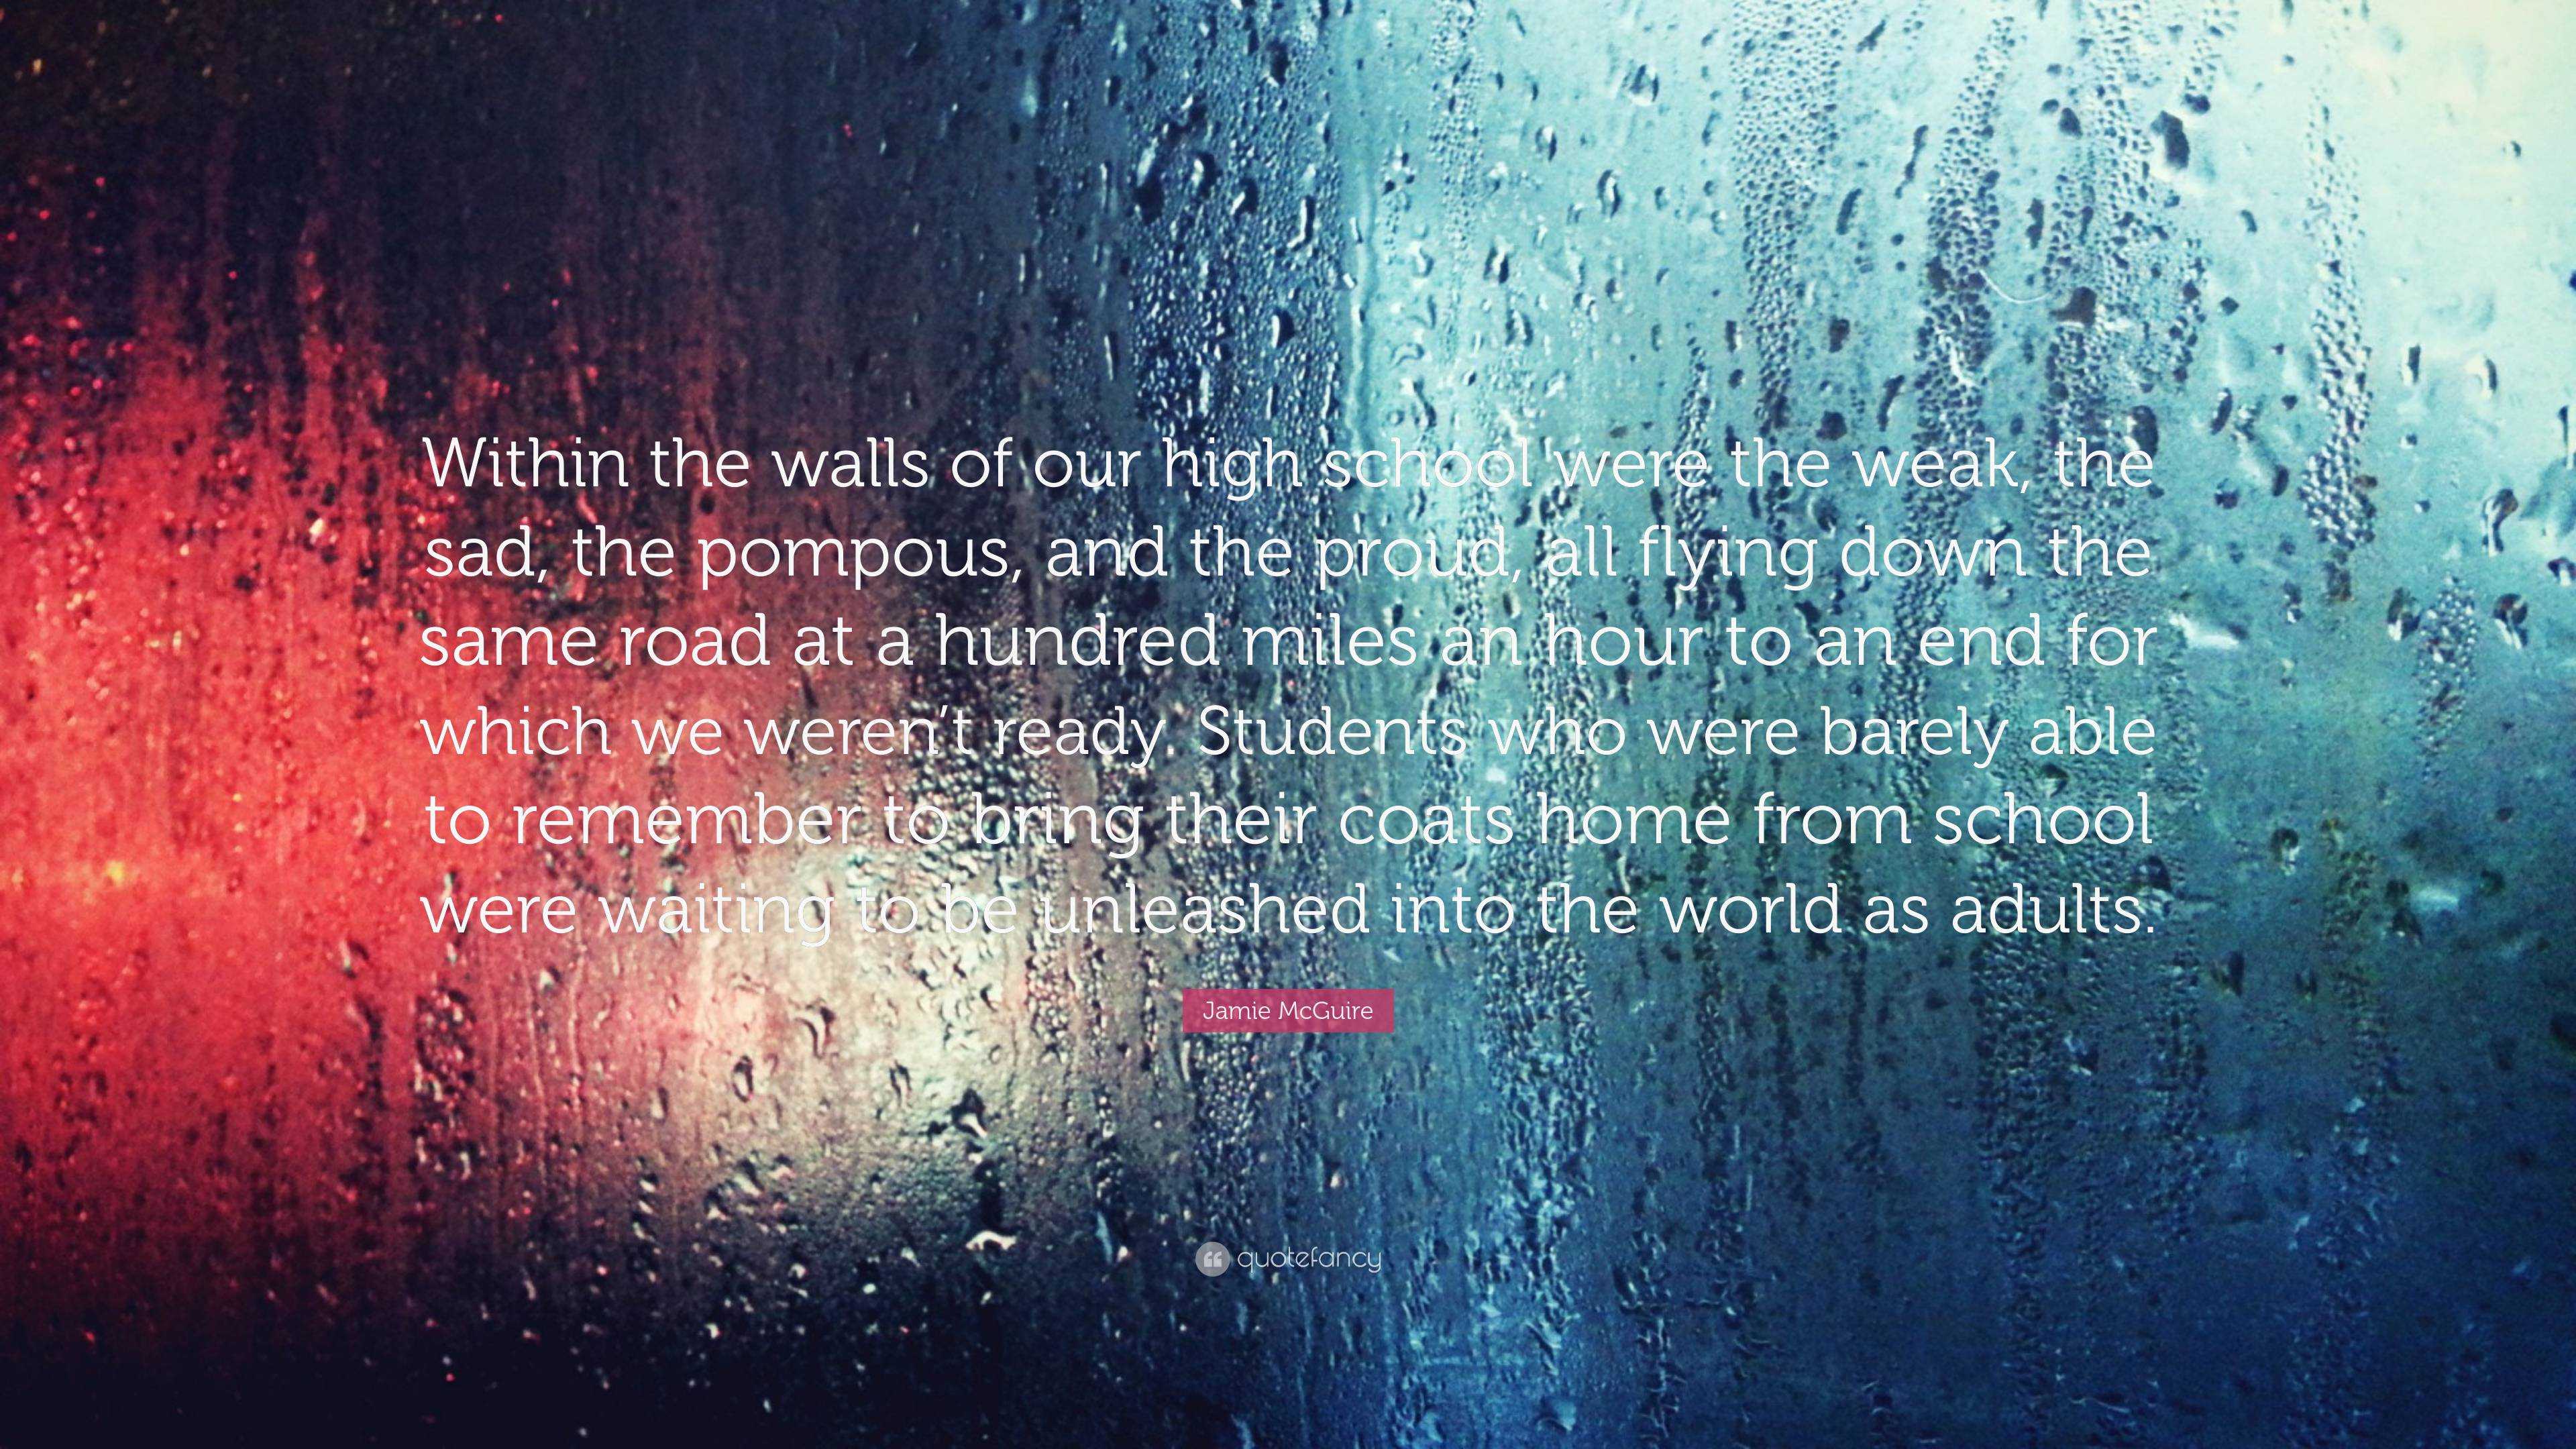 https://quotefancy.com/media/wallpaper/3840x2160/6820203-Jamie-McGuire-Quote-Within-the-walls-of-our-high-school-were-the.jpg